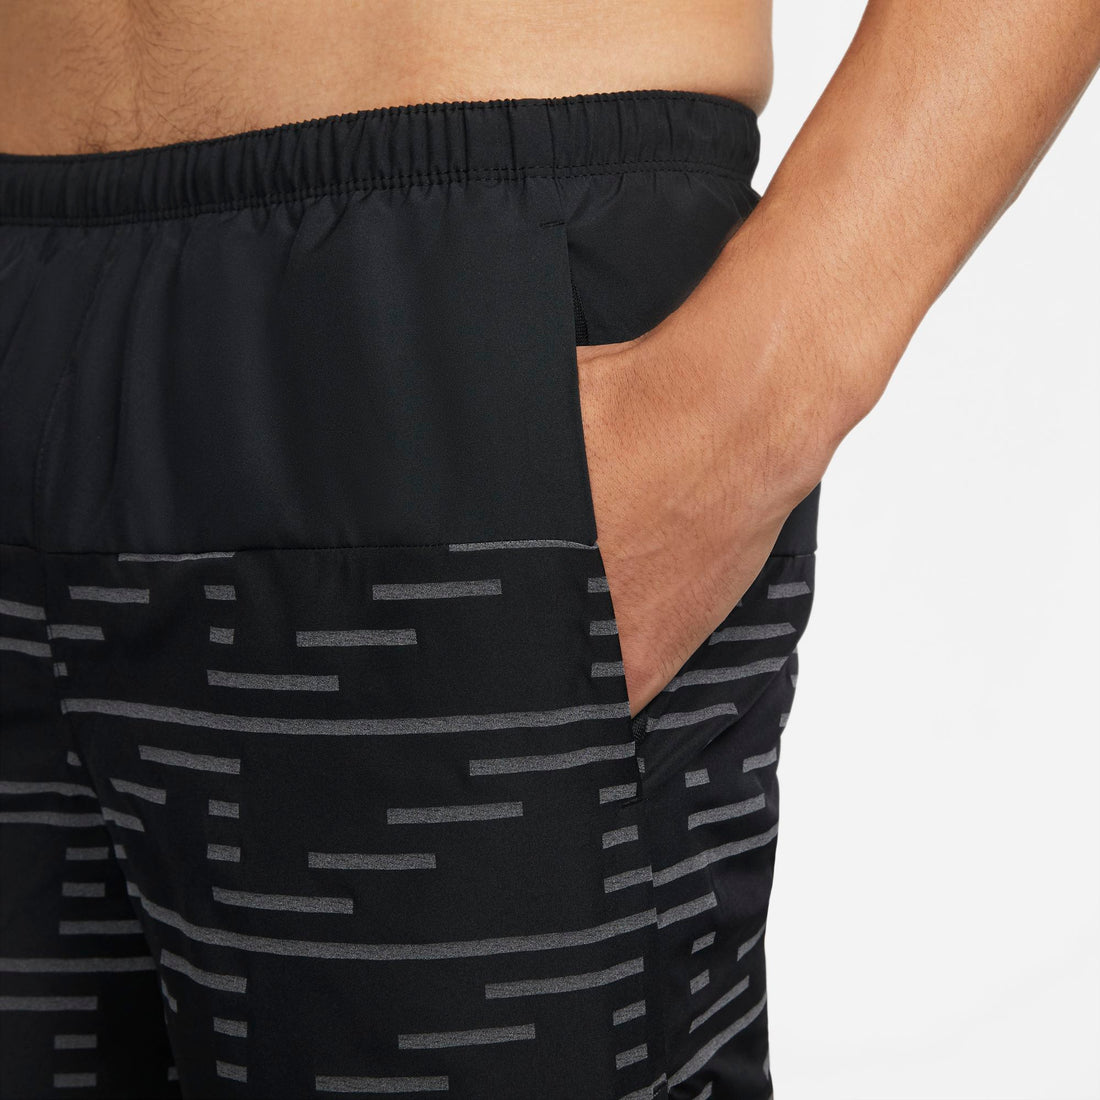 NIKE DRI-FIT CHALLENGER RUN DIVISION MENS 5" BRIEF-LINED RUNNING SHORTS